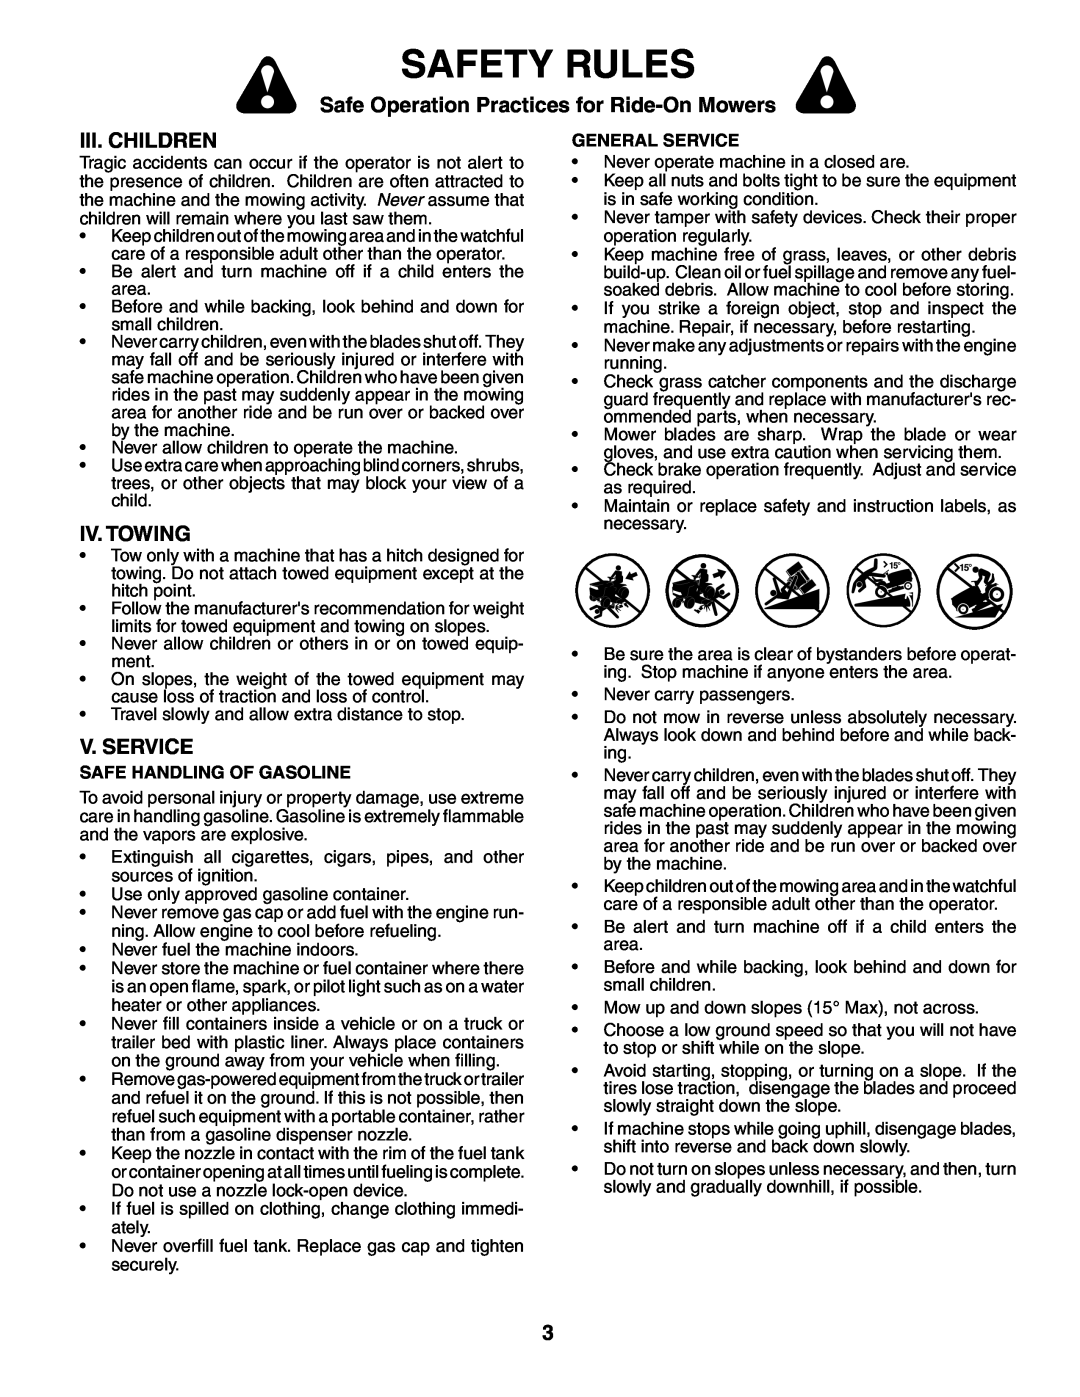 Poulan HD13538 manual Iii. Children, Iv. Towing, V. Service, Safety Rules, Safe Operation Practices for Ride-OnMowers 